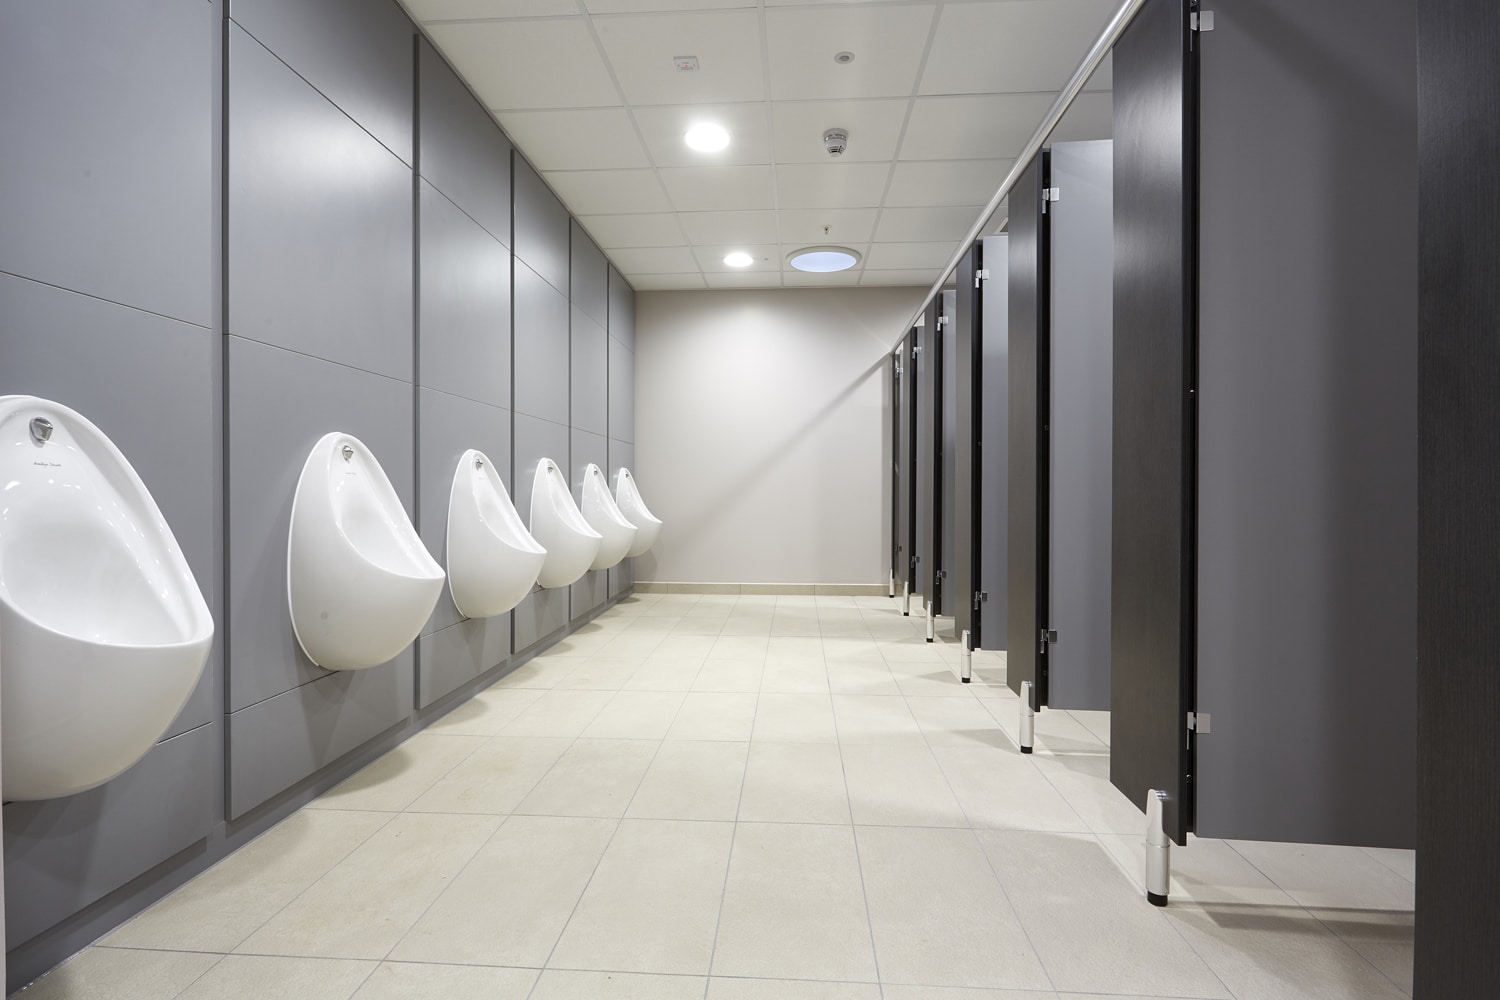 New washrooms for Global Food Producer